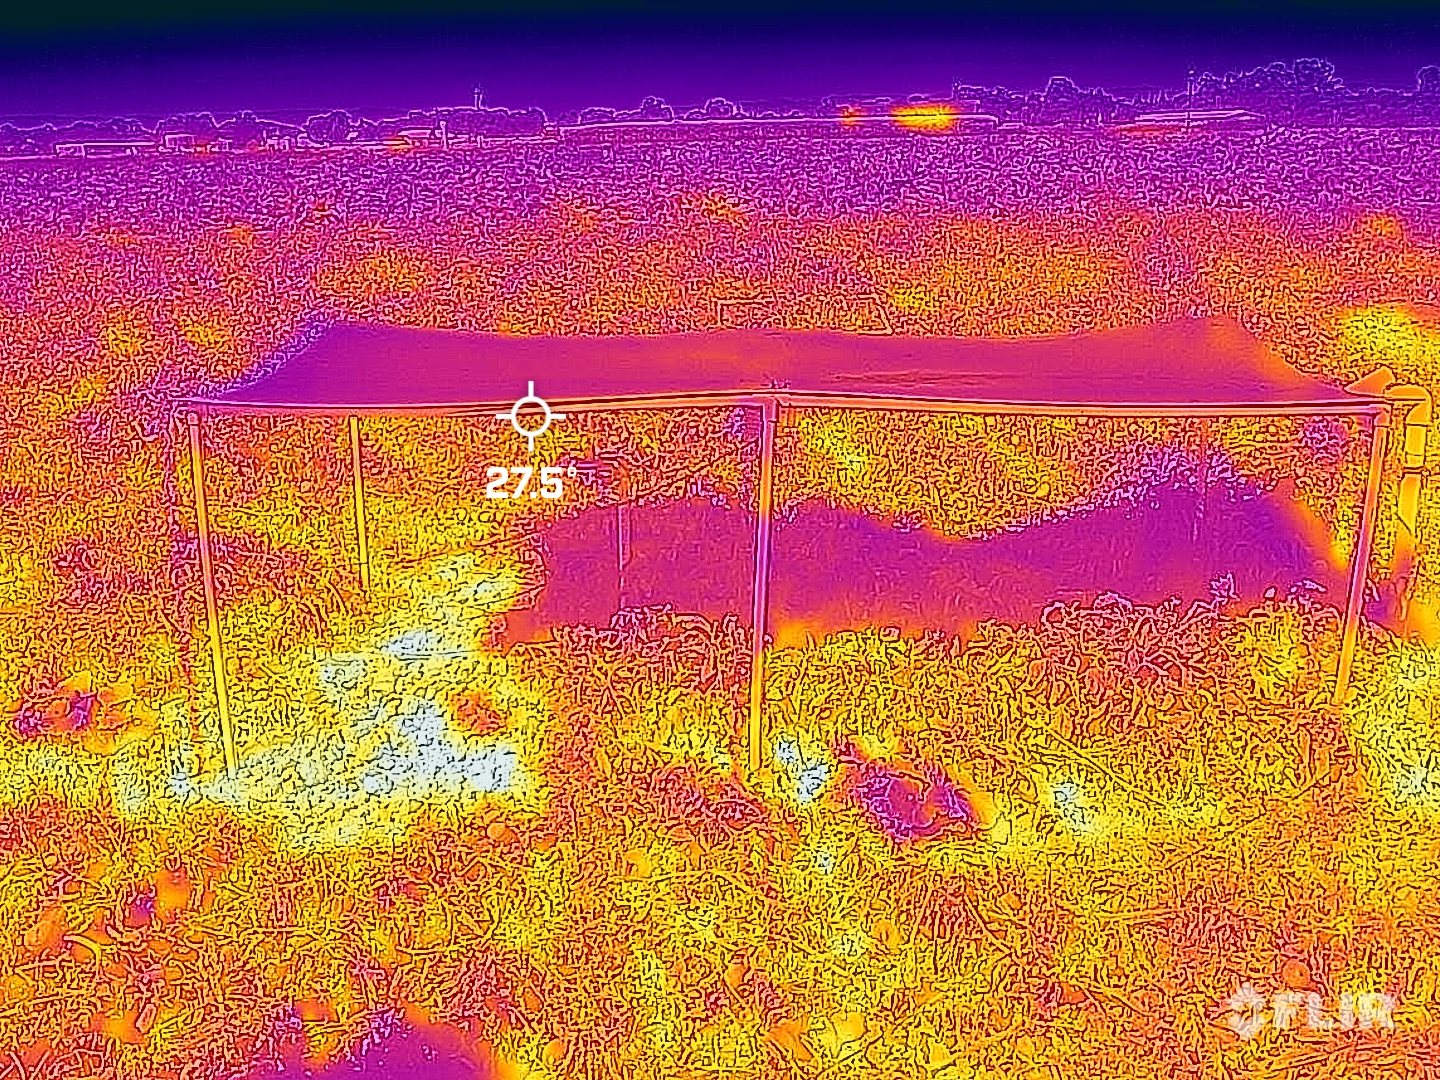 The same plants and solar panels shown with thermal imaging. The color changes illustrate the reduced temperatures in the shade of the panels. (Majdi Abou Najm/UC Davis)